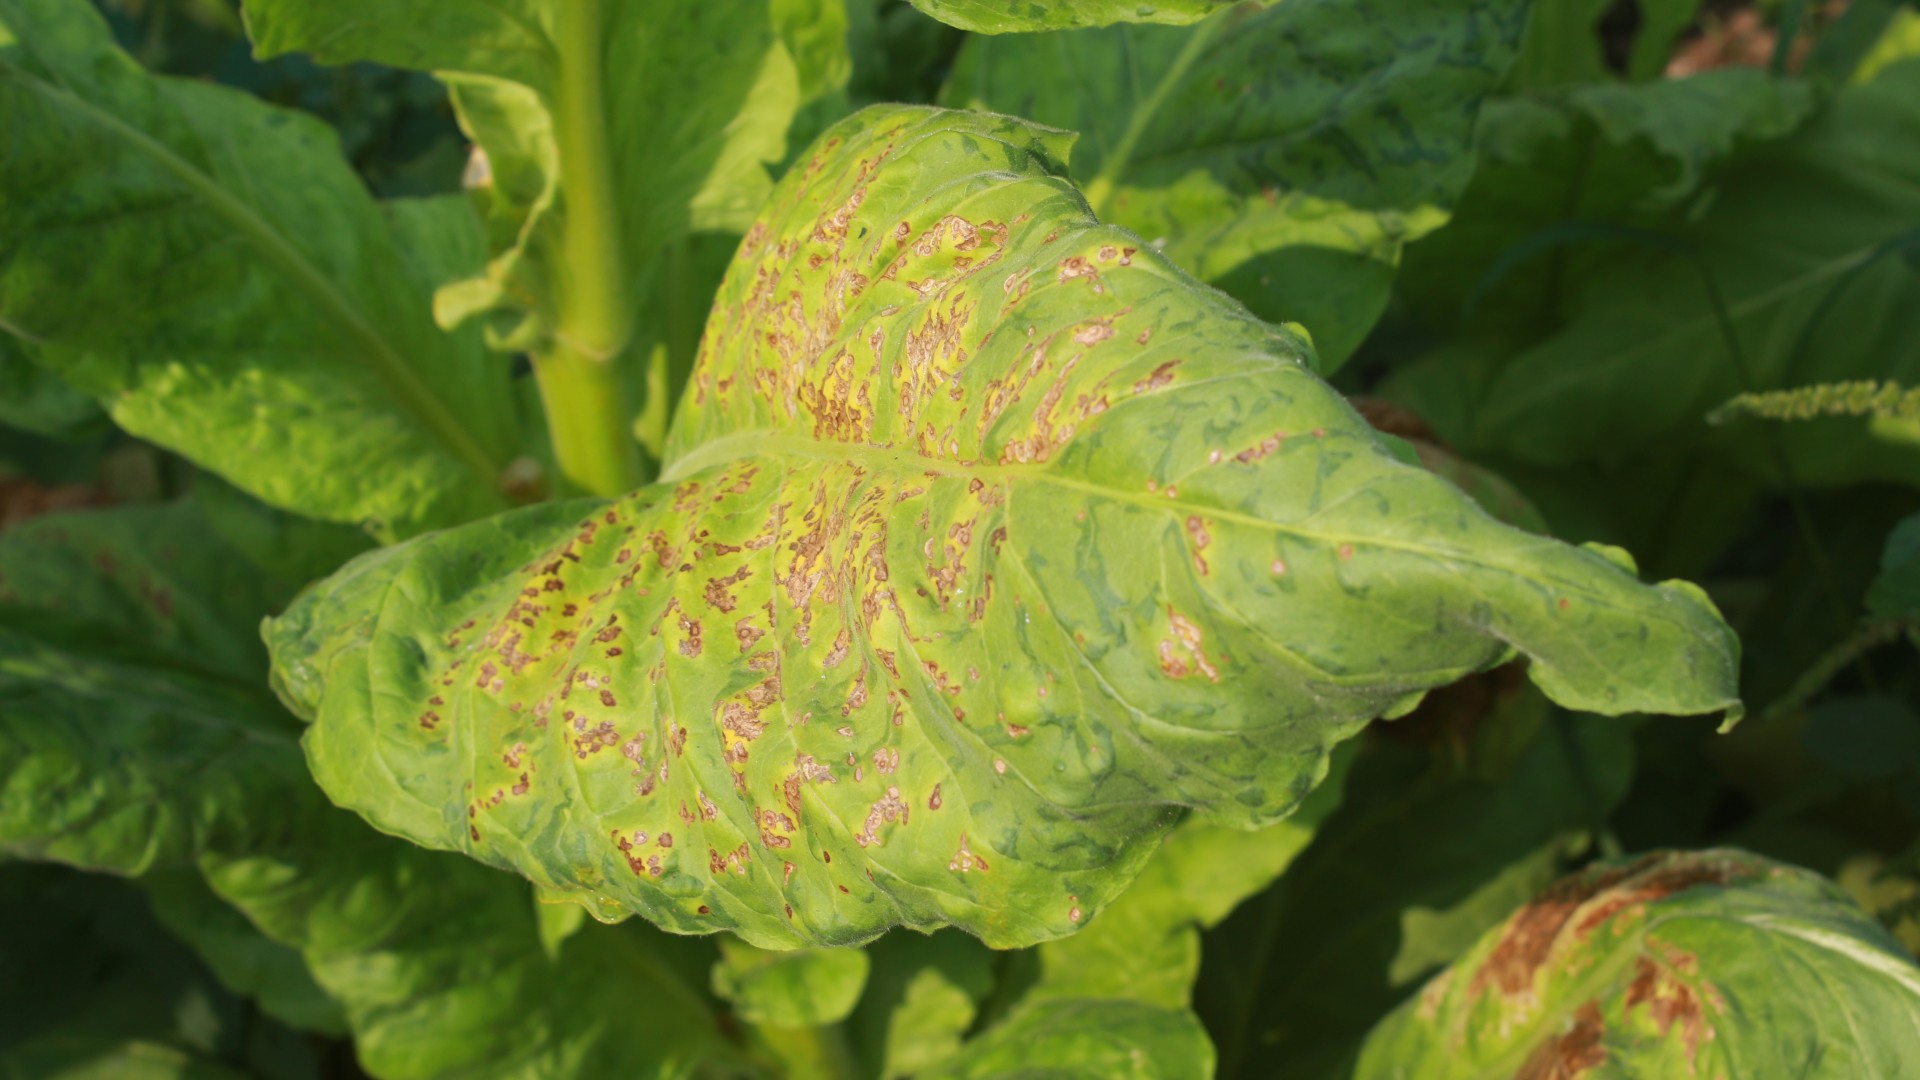 A close up of a big green leaf covered in dark brown spots showing that it is infected with the tobacco mosaic virus.